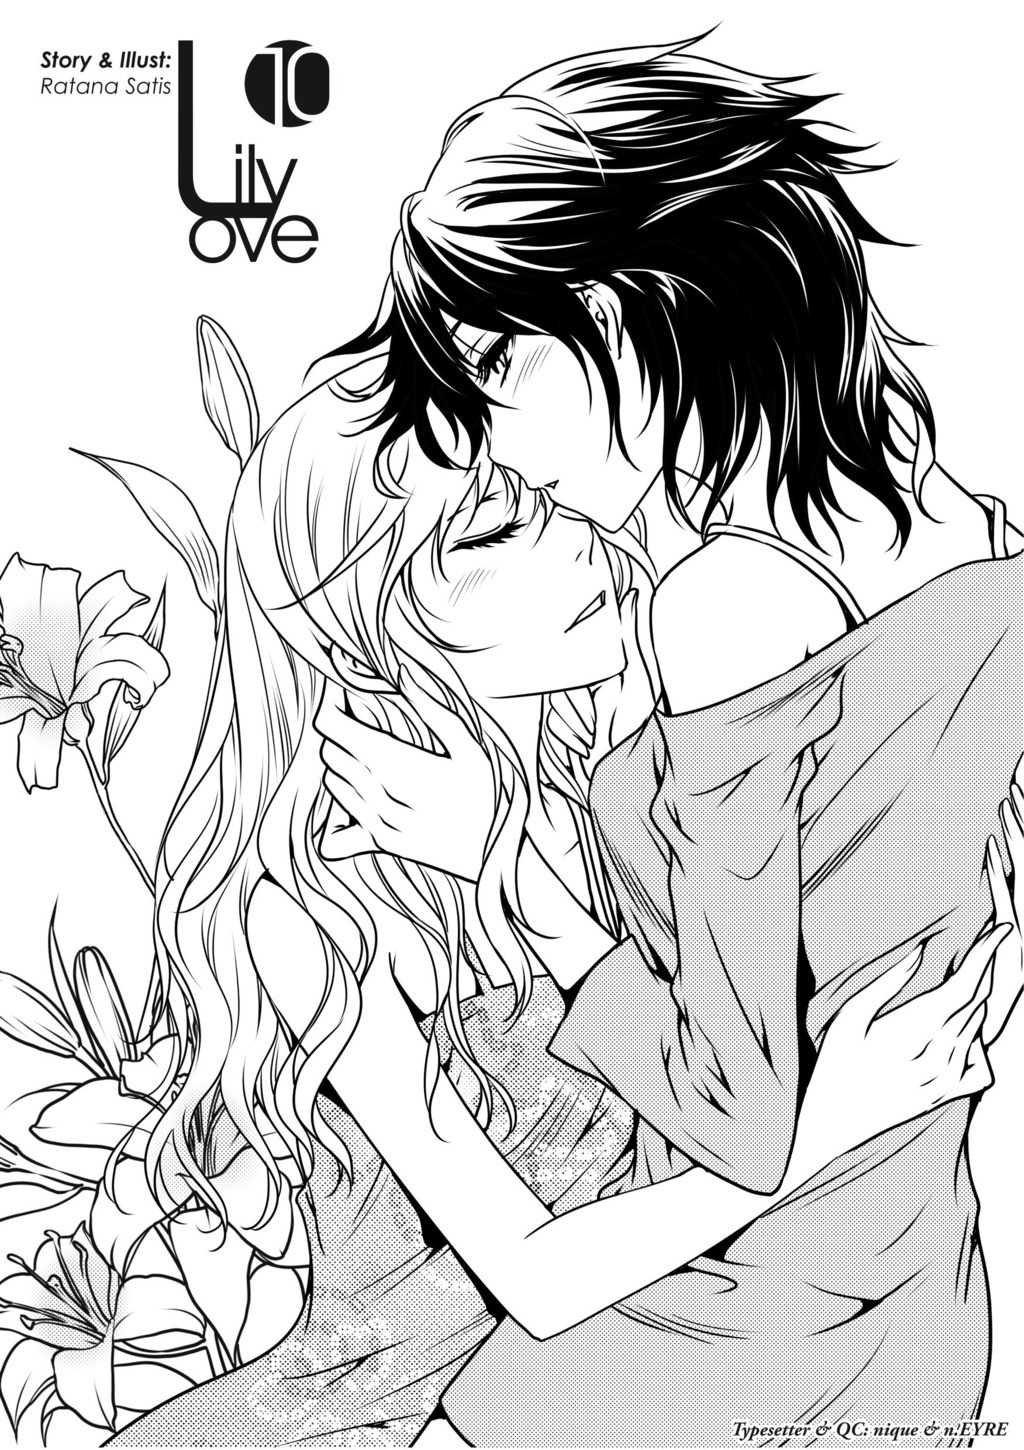   Lily Love Chapter 10 - RAWS are here :D (log in via FB to see)  